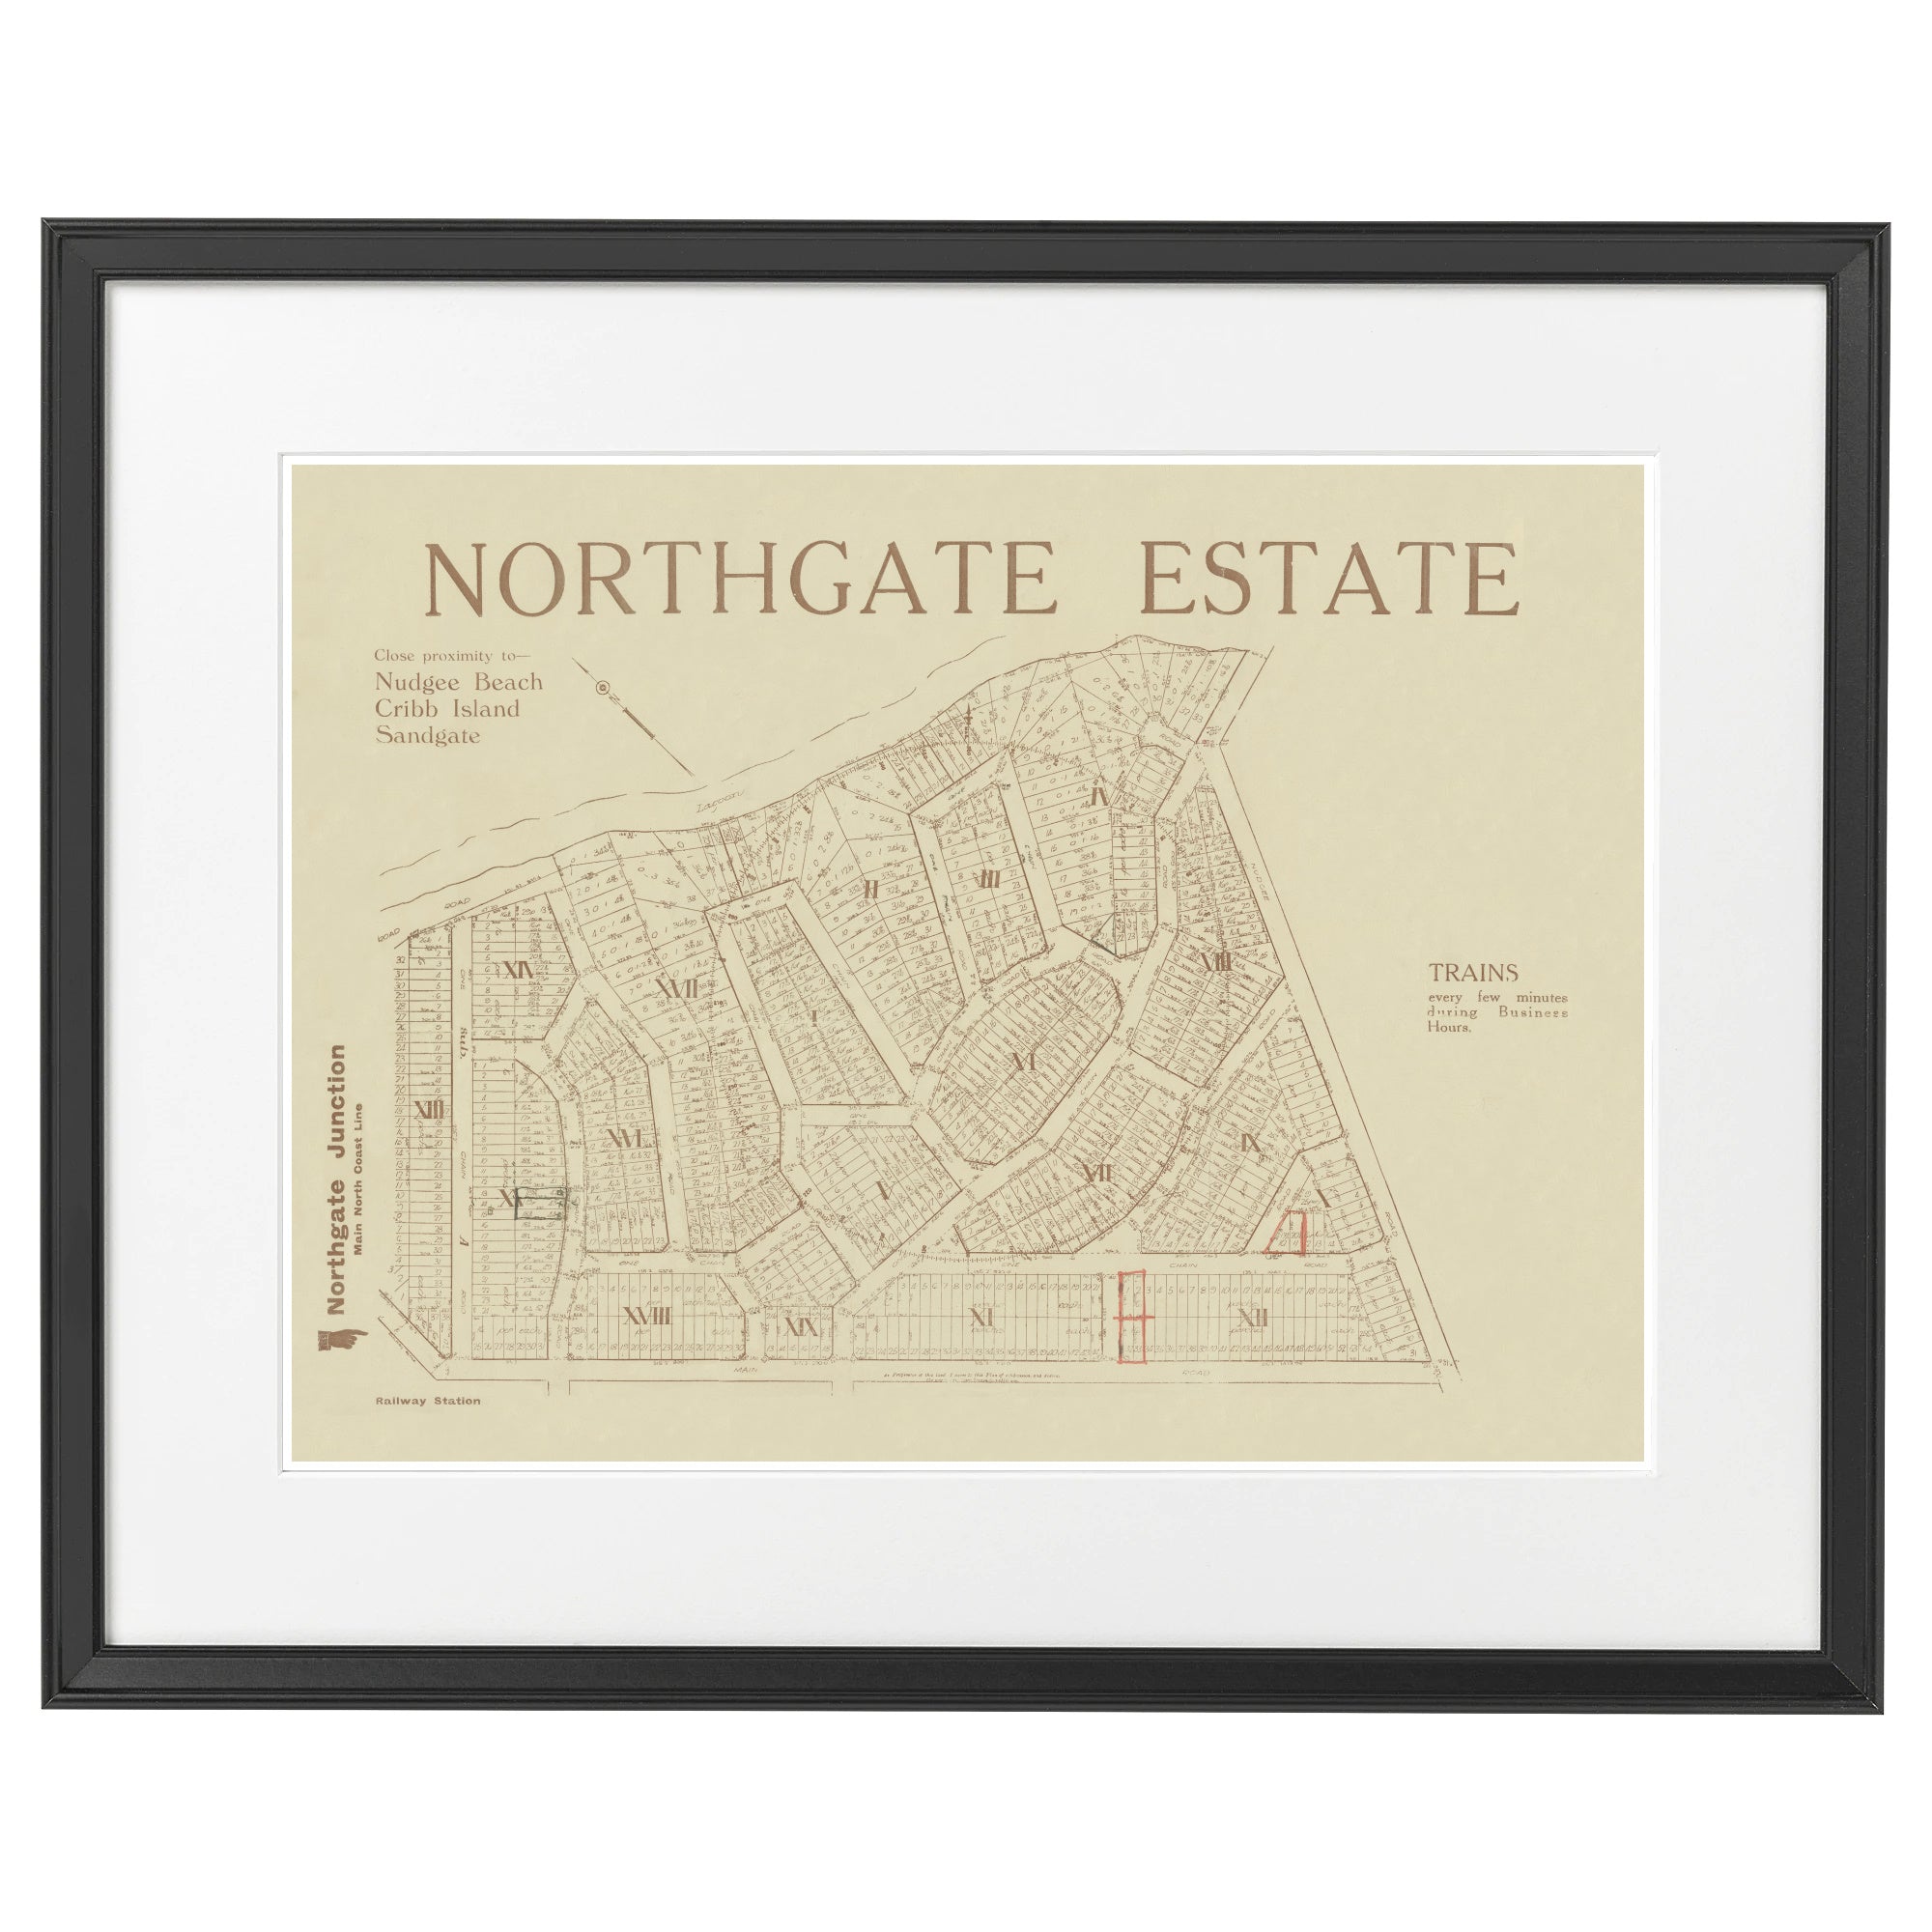 1922 Northgate Estate - 101 years ago today